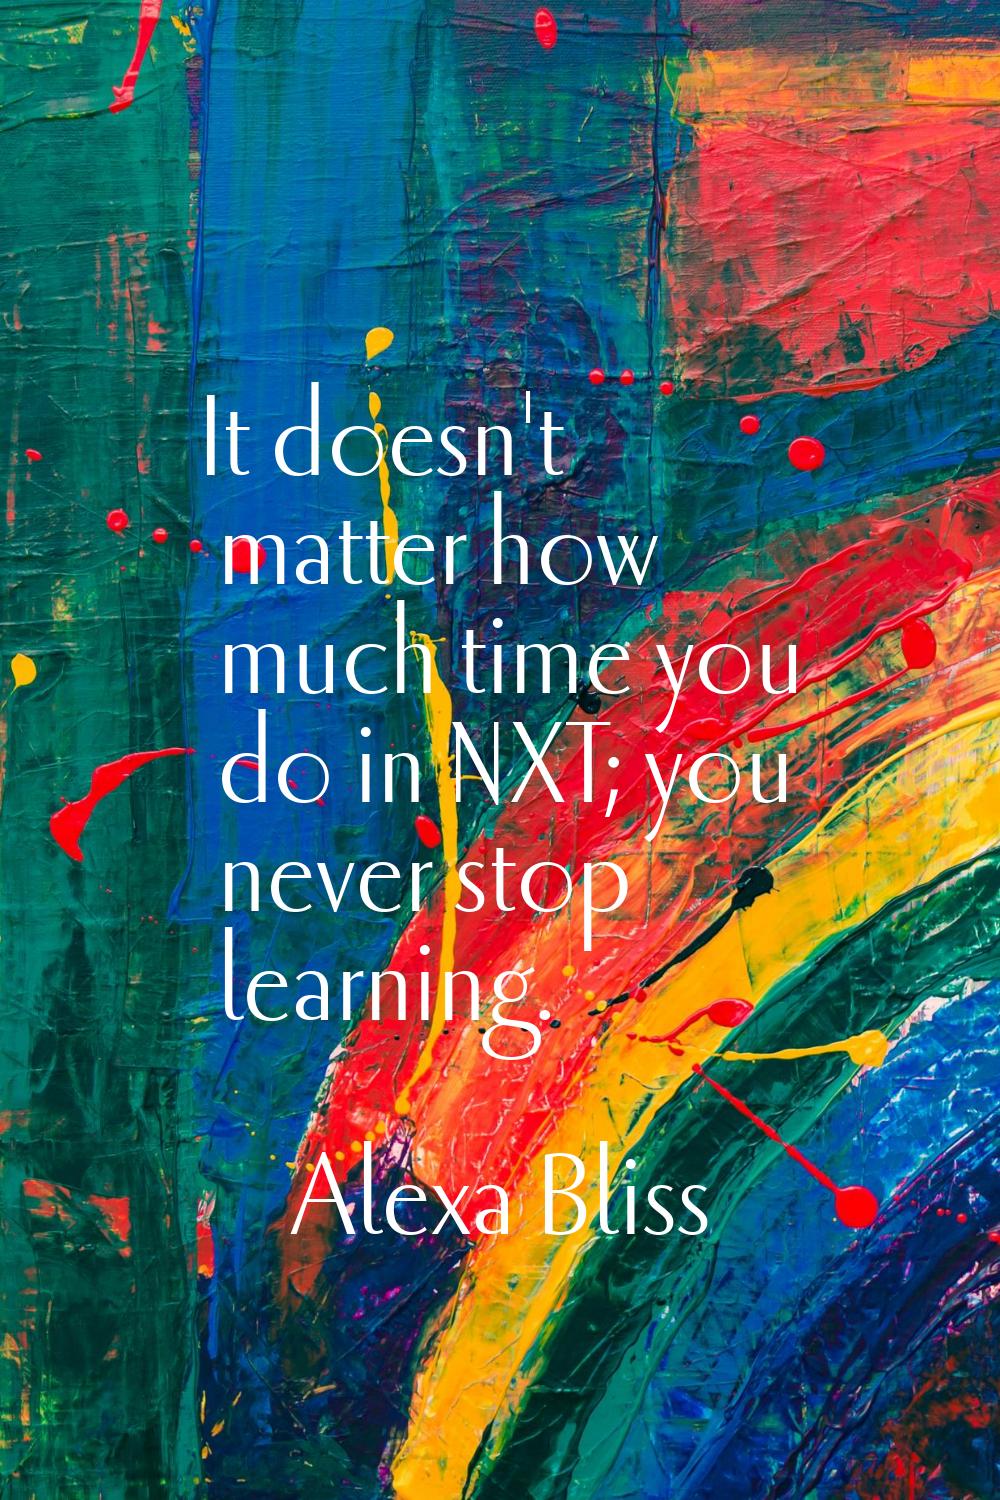 It doesn't matter how much time you do in NXT; you never stop learning.